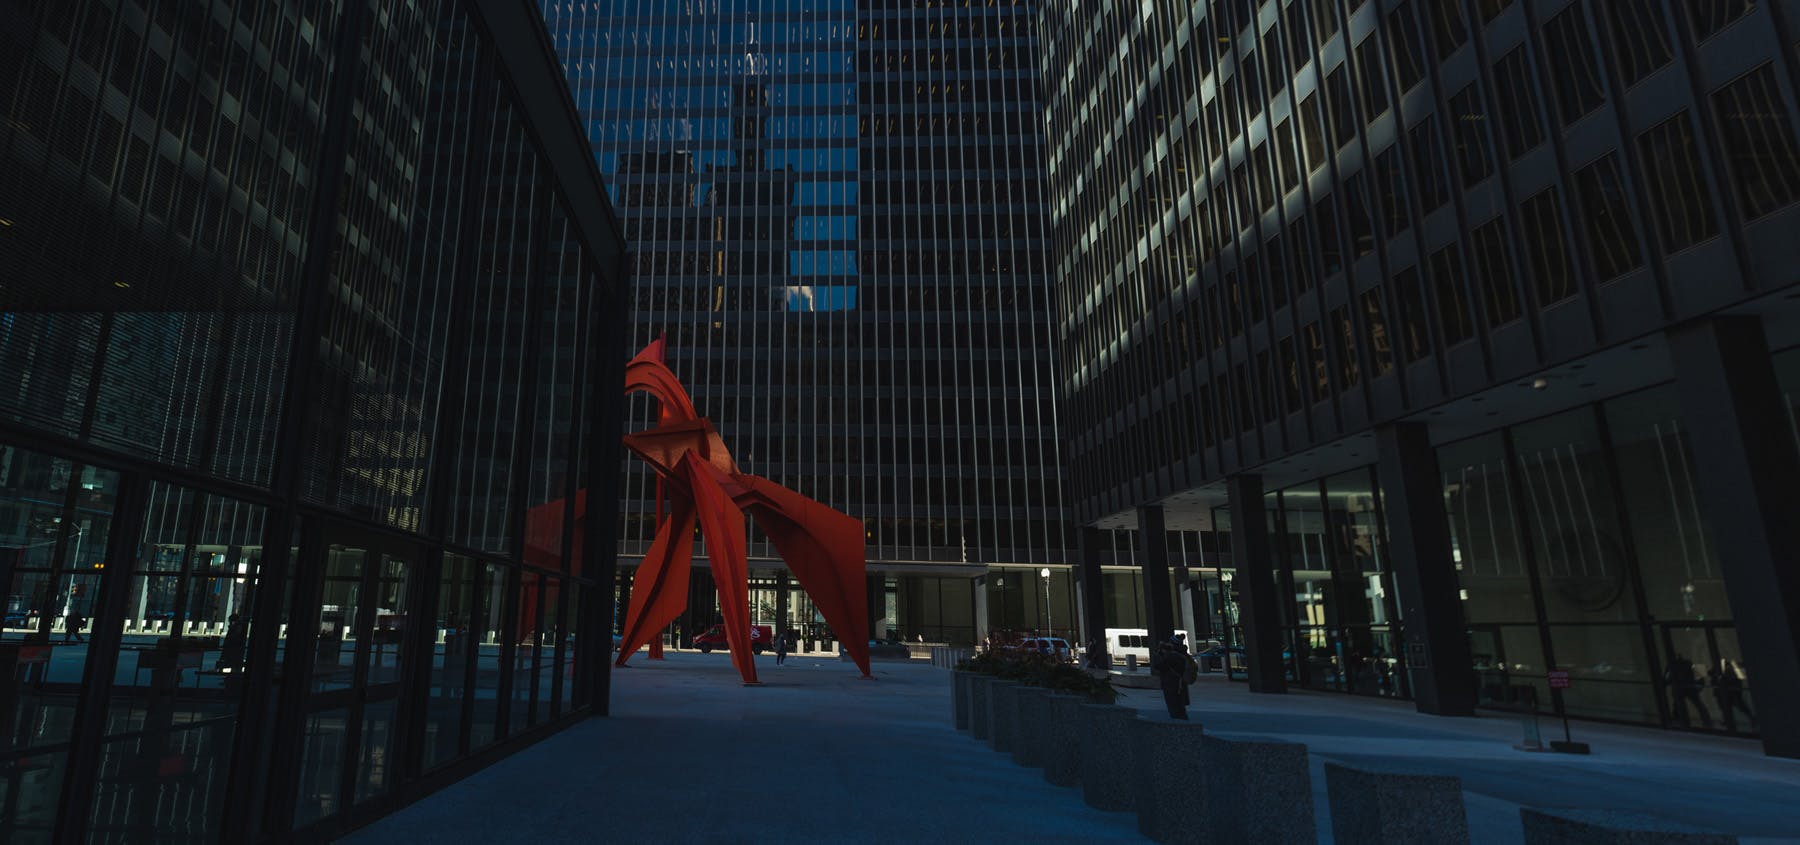 a picture of Calder's Flamingo slightly obscured by the US Post office building and you can see the Sears tower reflected on the building behind  the Flamingo.